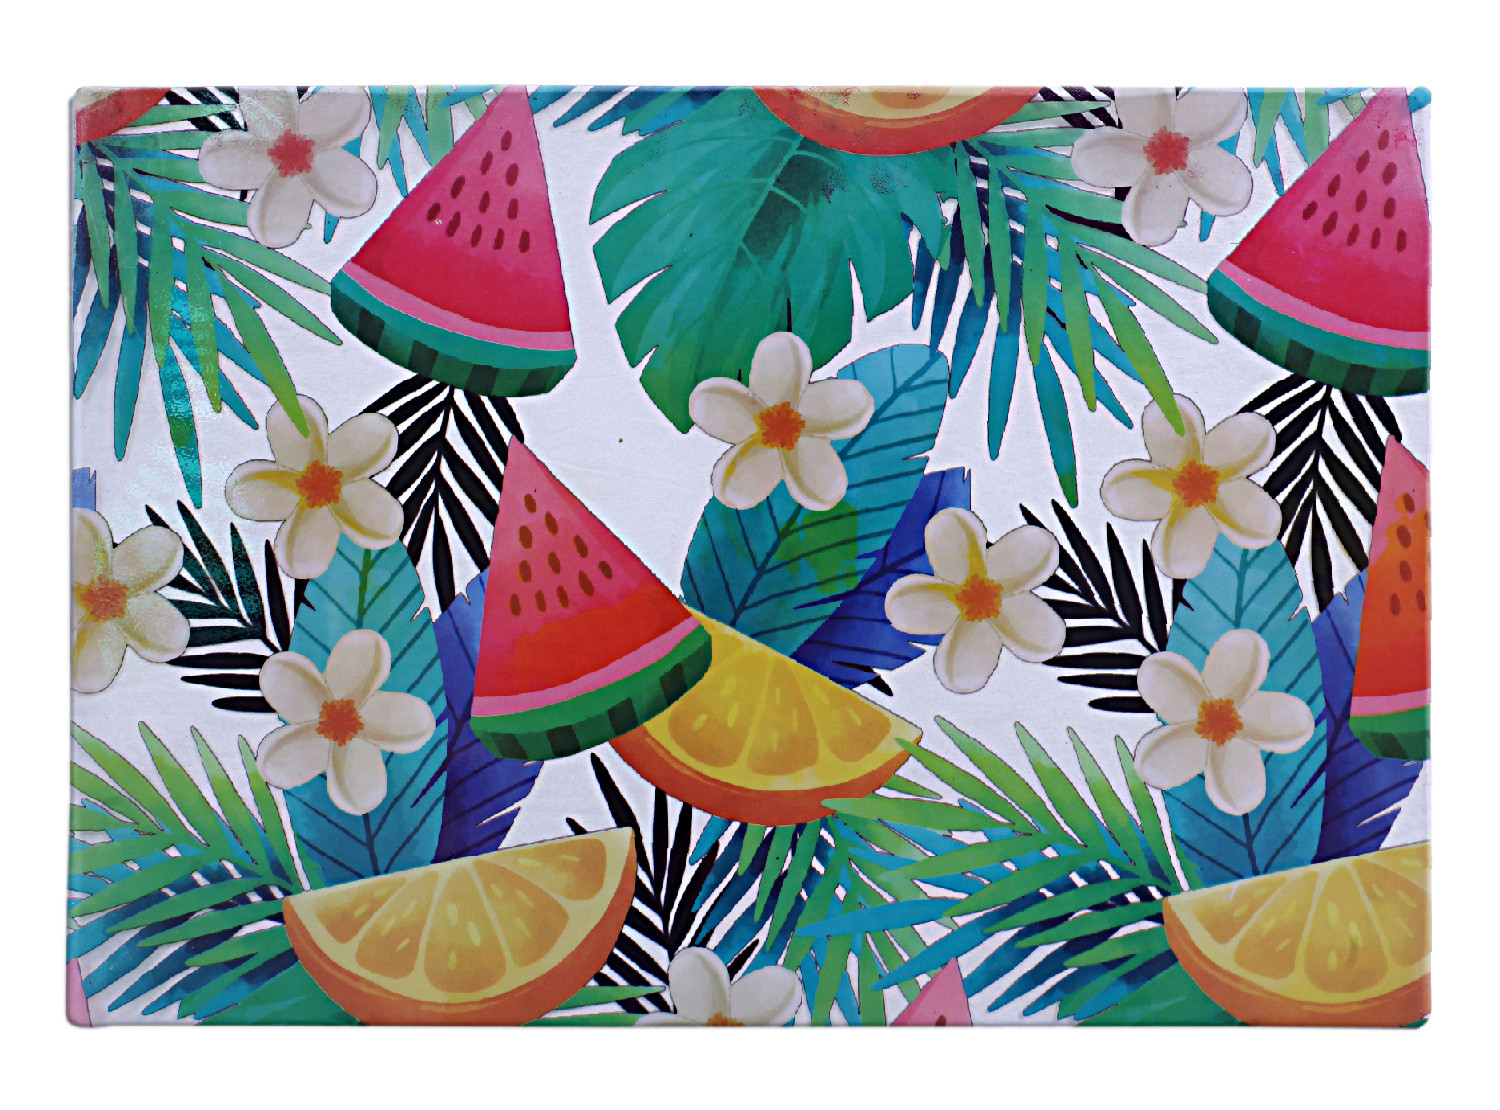 Kuber Industries Fruits Print PVC Waterproof & Washable Refrigerator|Fridge Placemats For Home & Kitchen Set of 6 (Transparent)